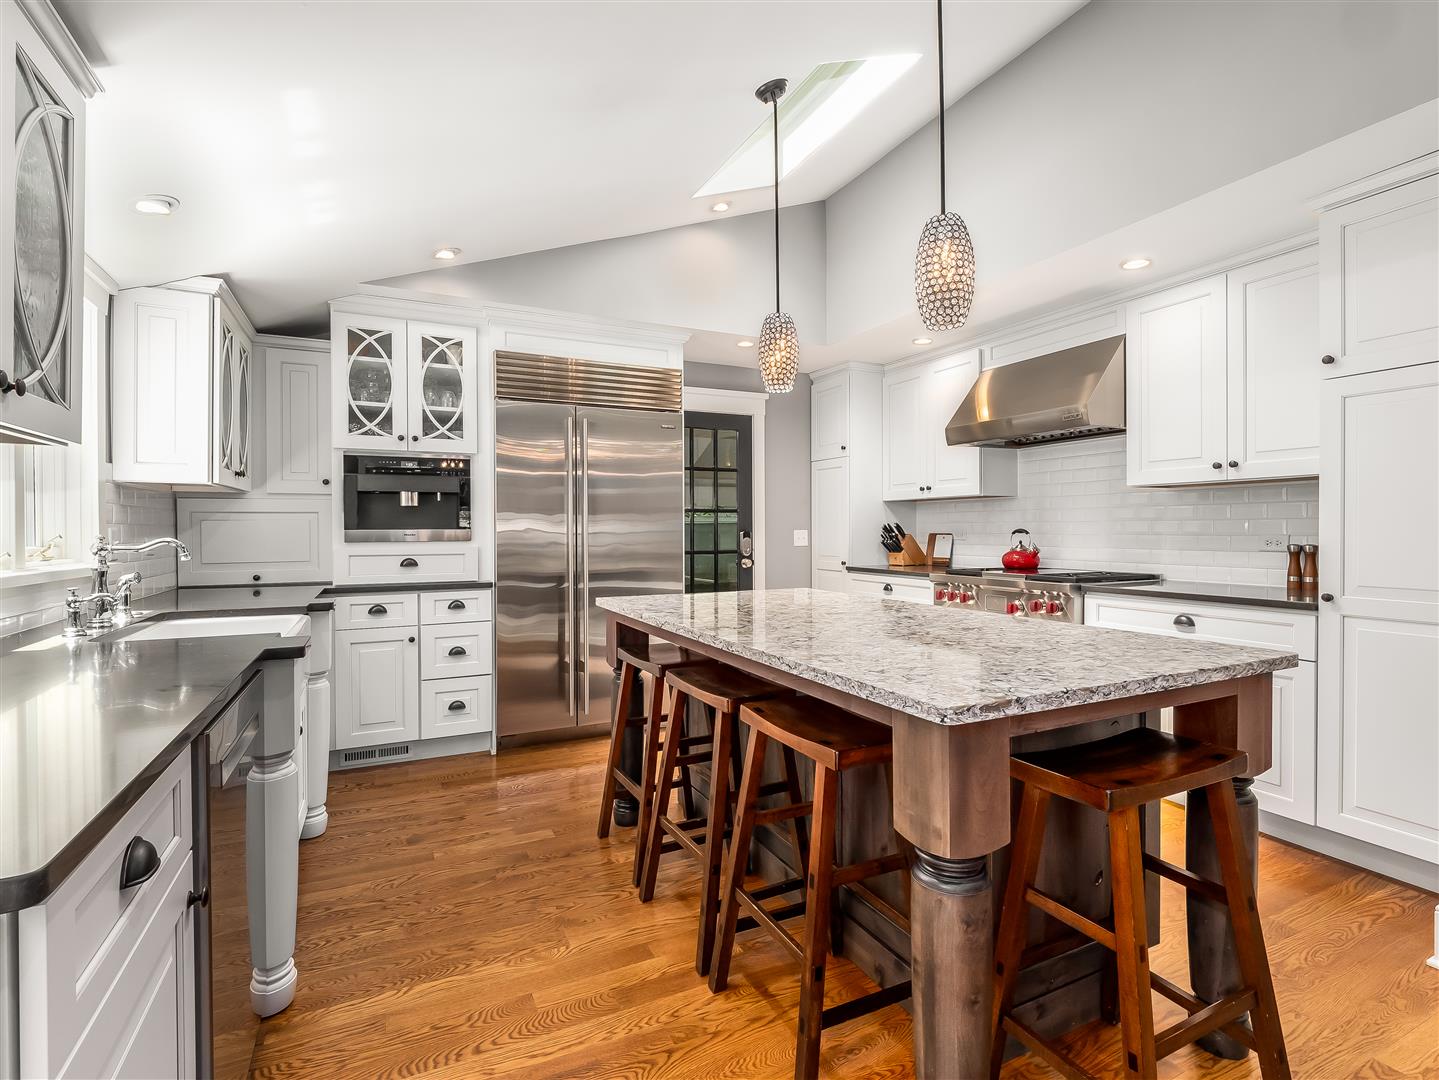 Newly renovated kitchen with traditional white beveled cabinetry and styled glass displays, dark contrasting countertops, stainless steel appliances and a natural wood island with a granite top.